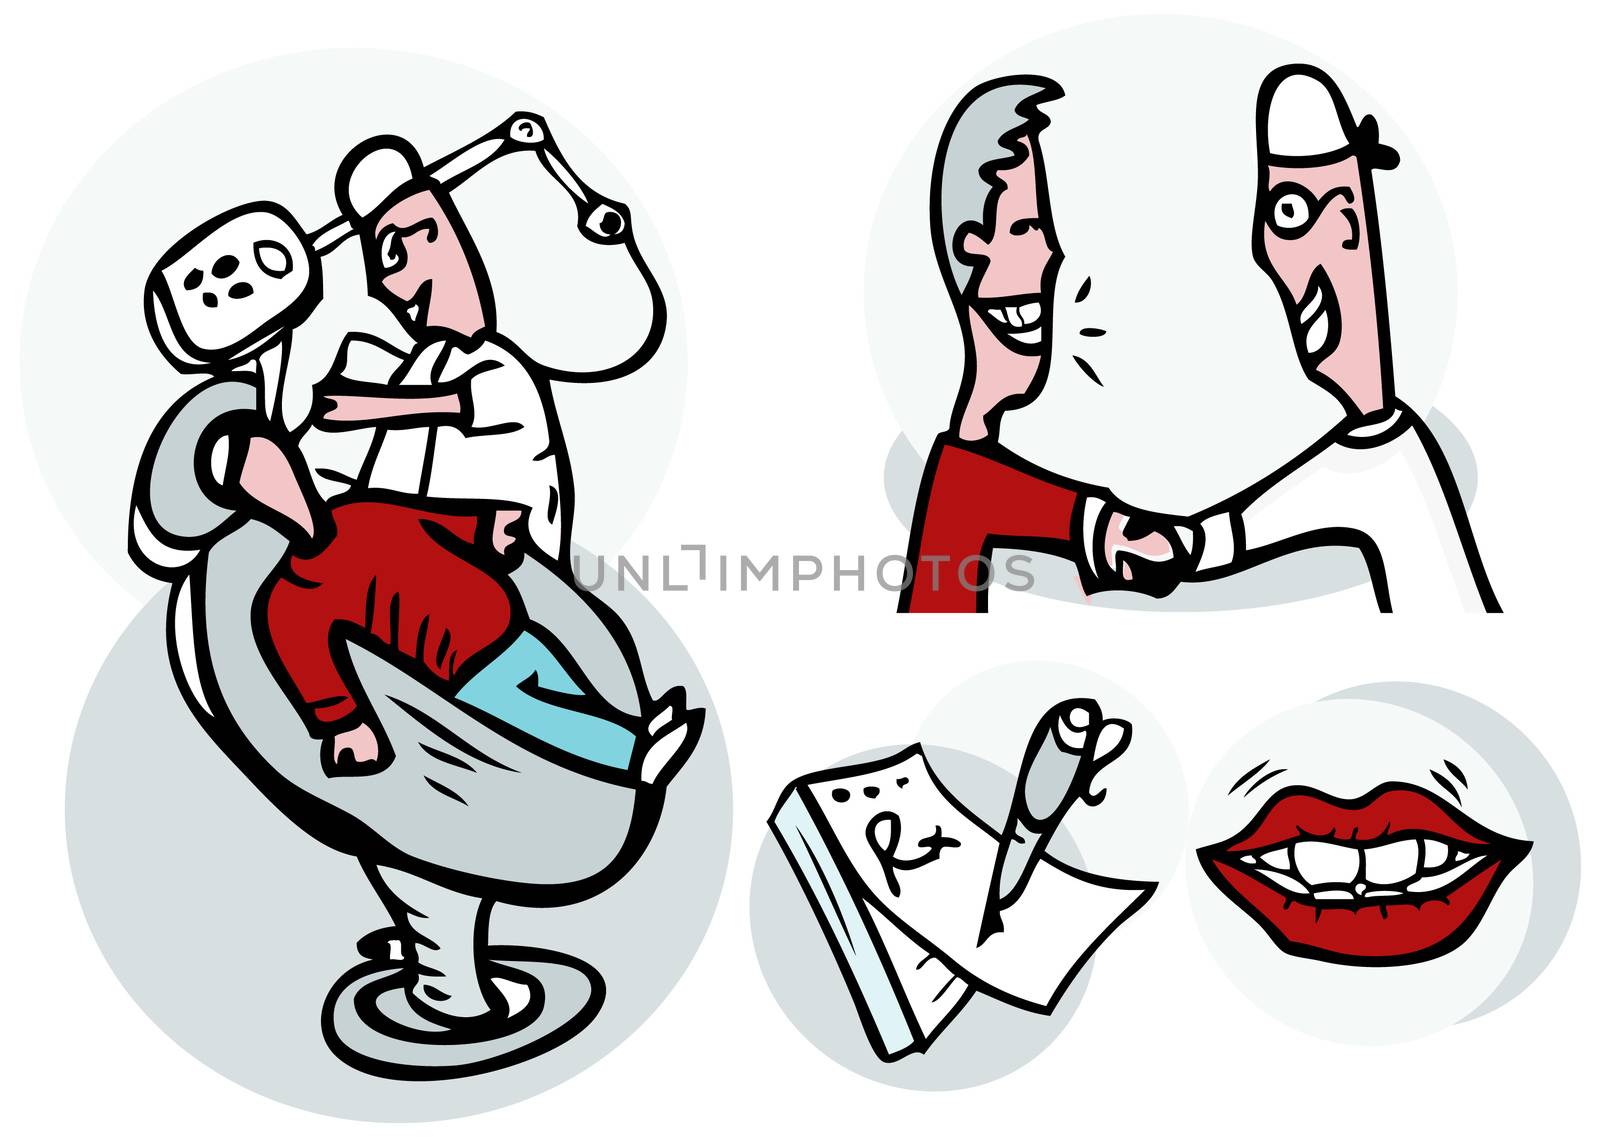 Dentist working on patient vector icons set by IconsJewelry